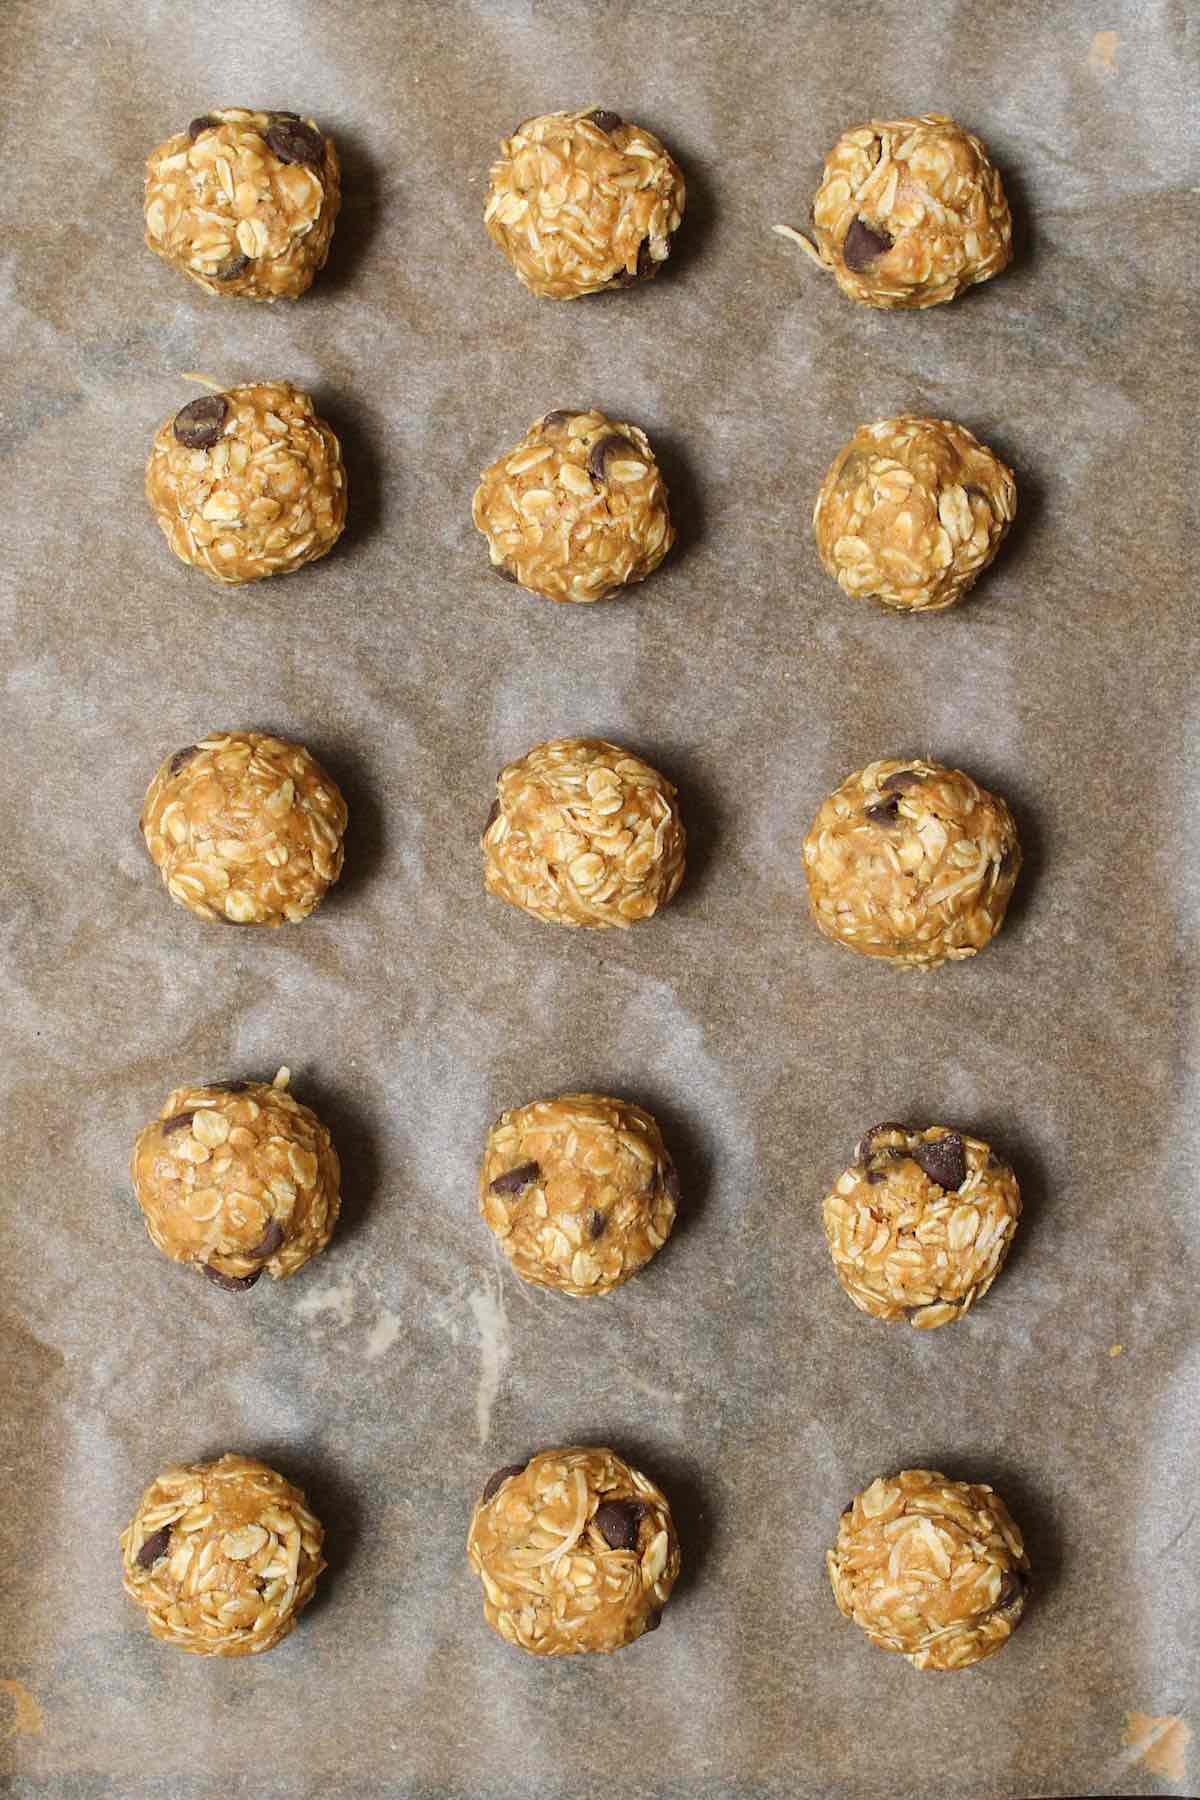 No Bake Energy Balls on a work surface in a rectangular pattern showing texture